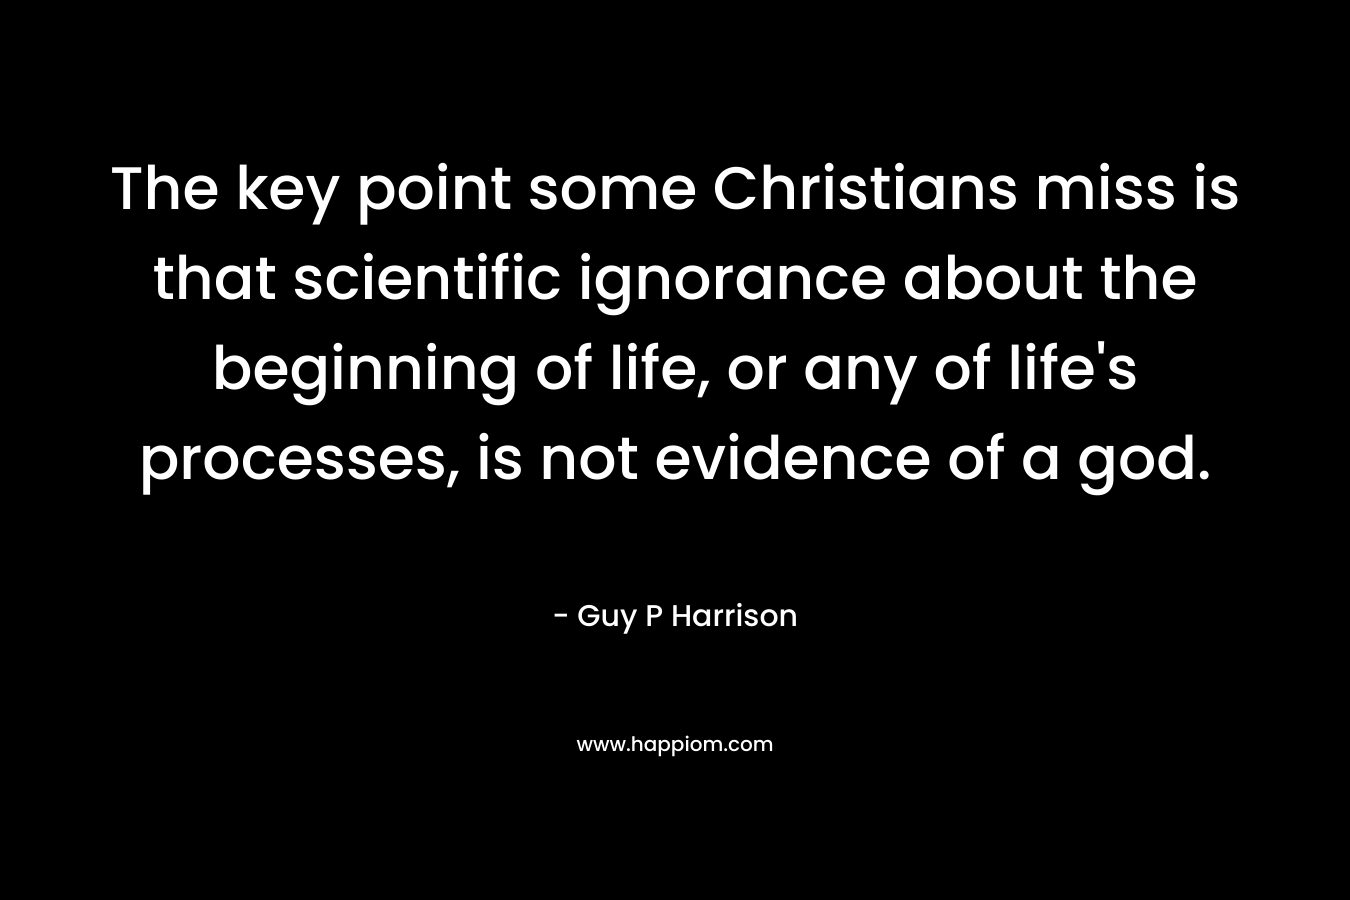 The key point some Christians miss is that scientific ignorance about the beginning of life, or any of life's processes, is not evidence of a god.